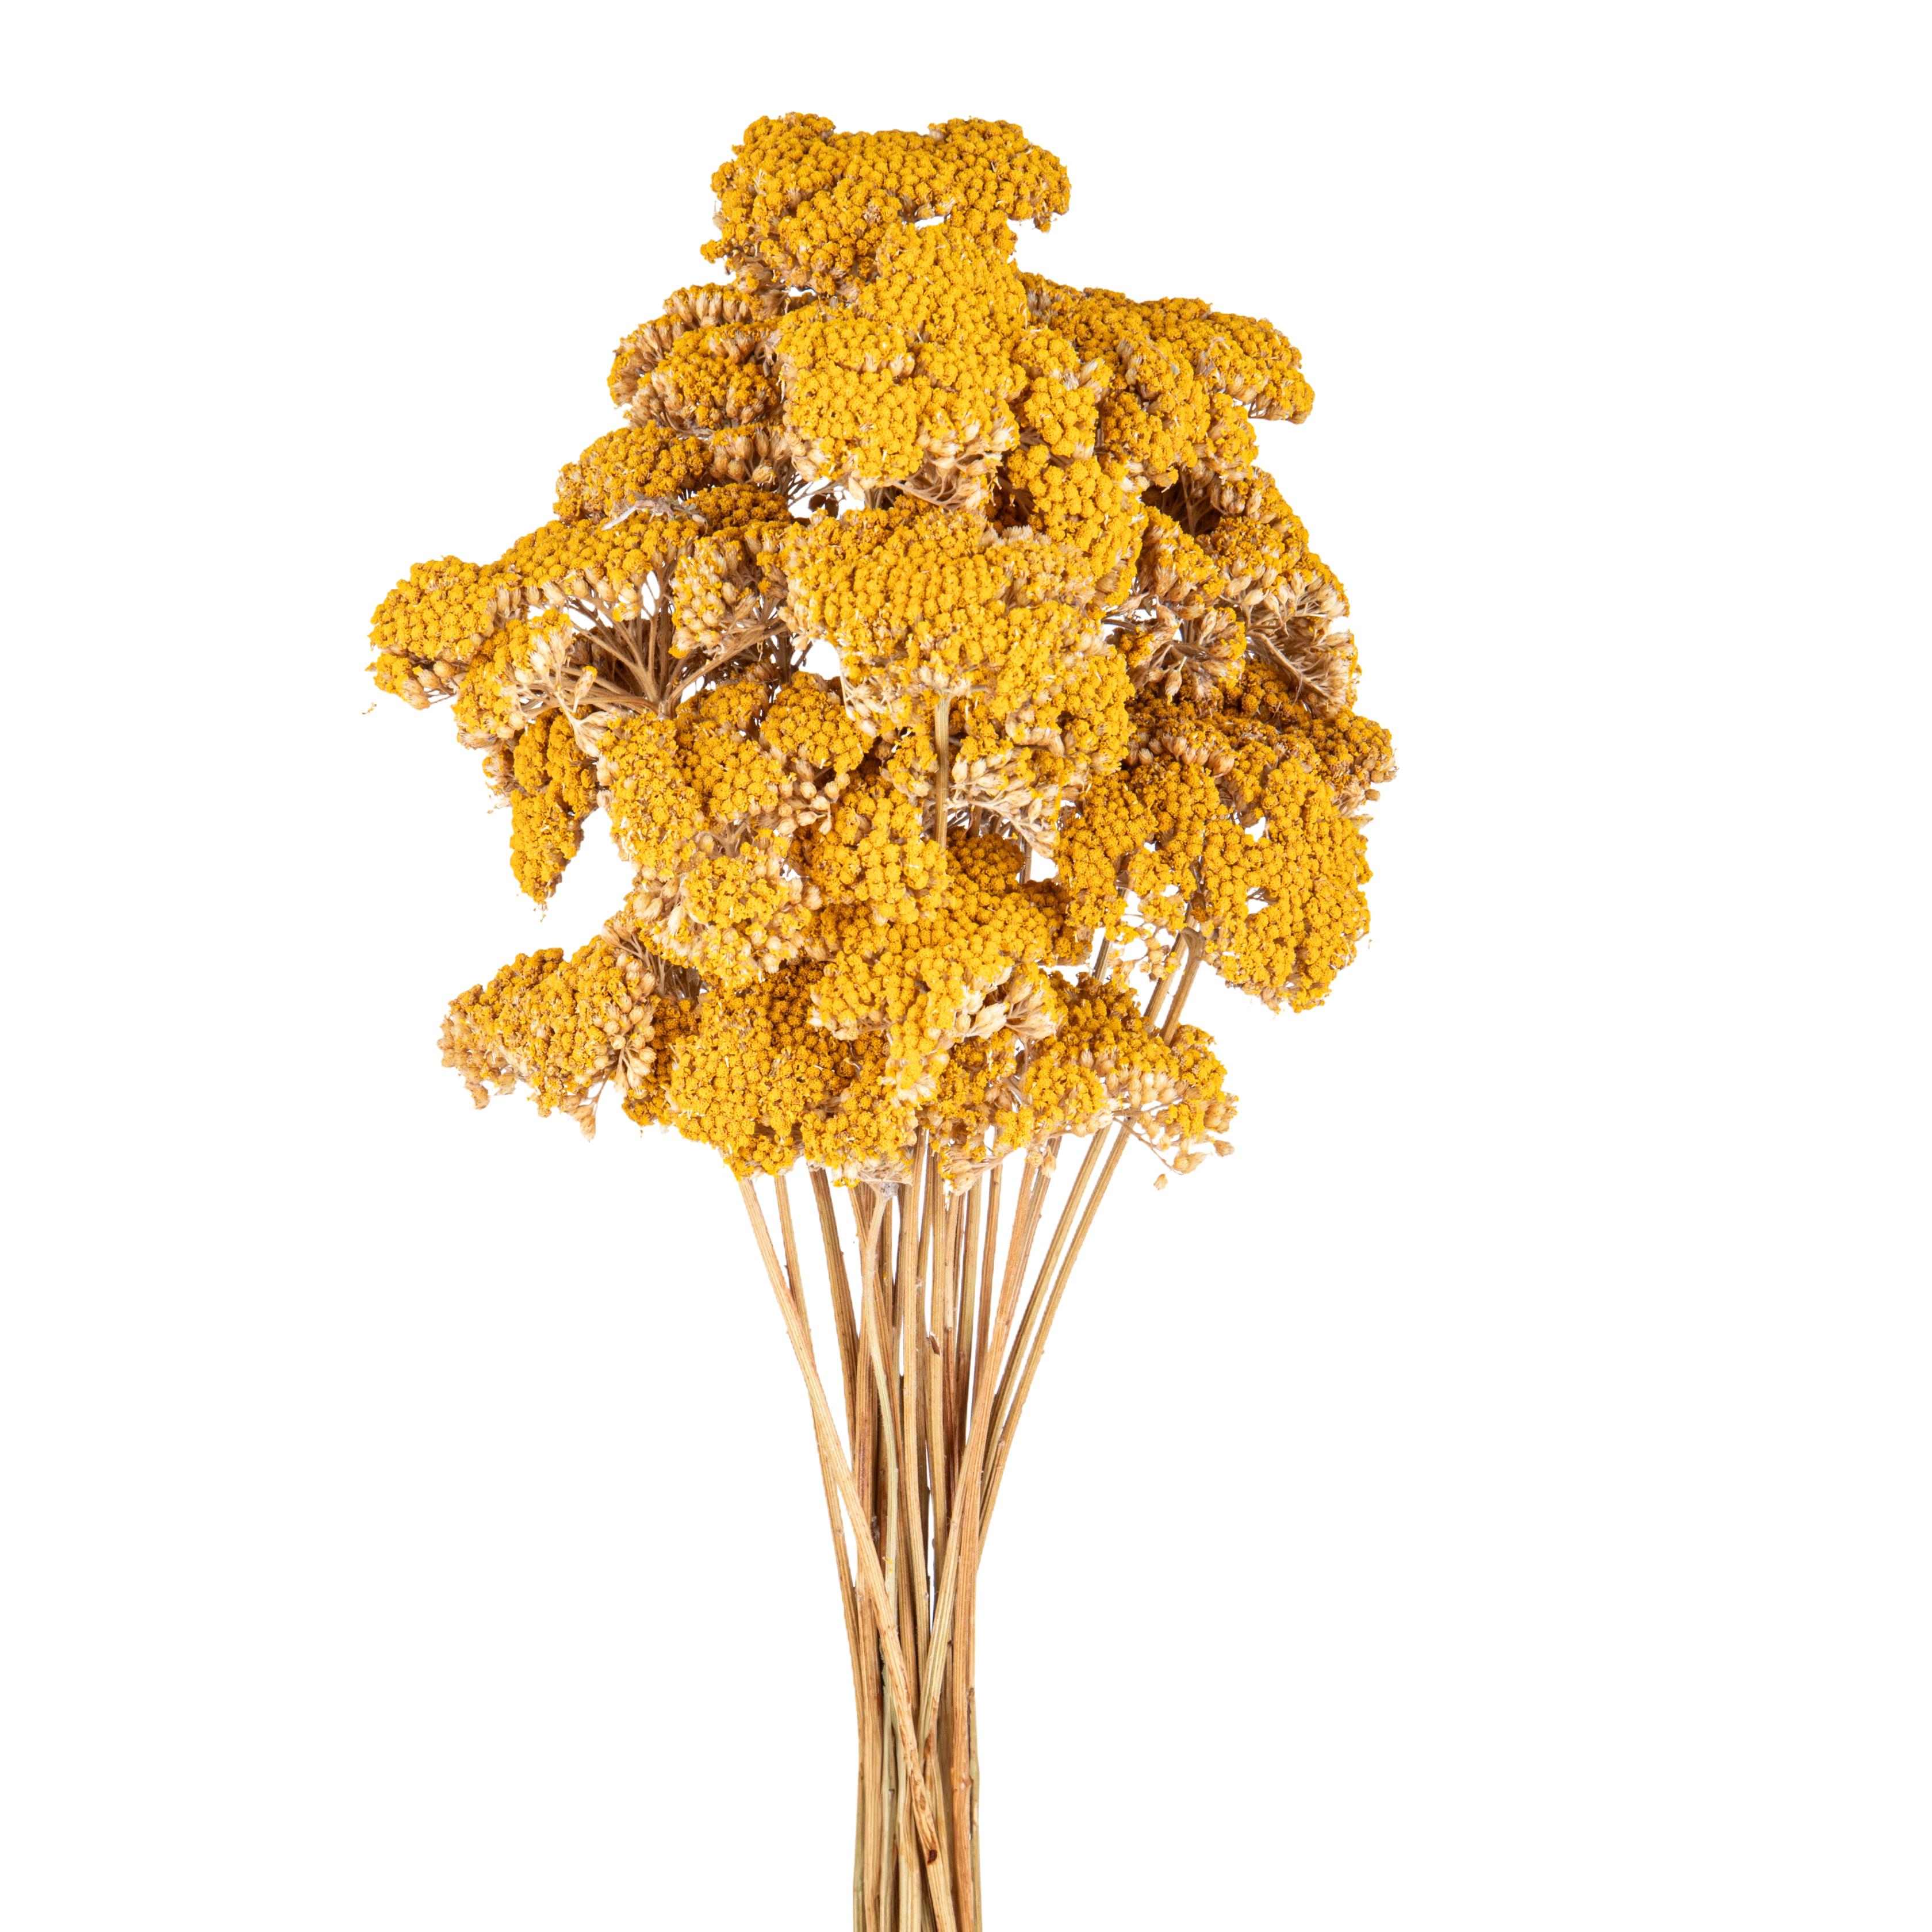 NATURAL PRODUCTS DRIED FLOWERS AND ERBS,ACHILLEA FILIPENDULA NAT A KG